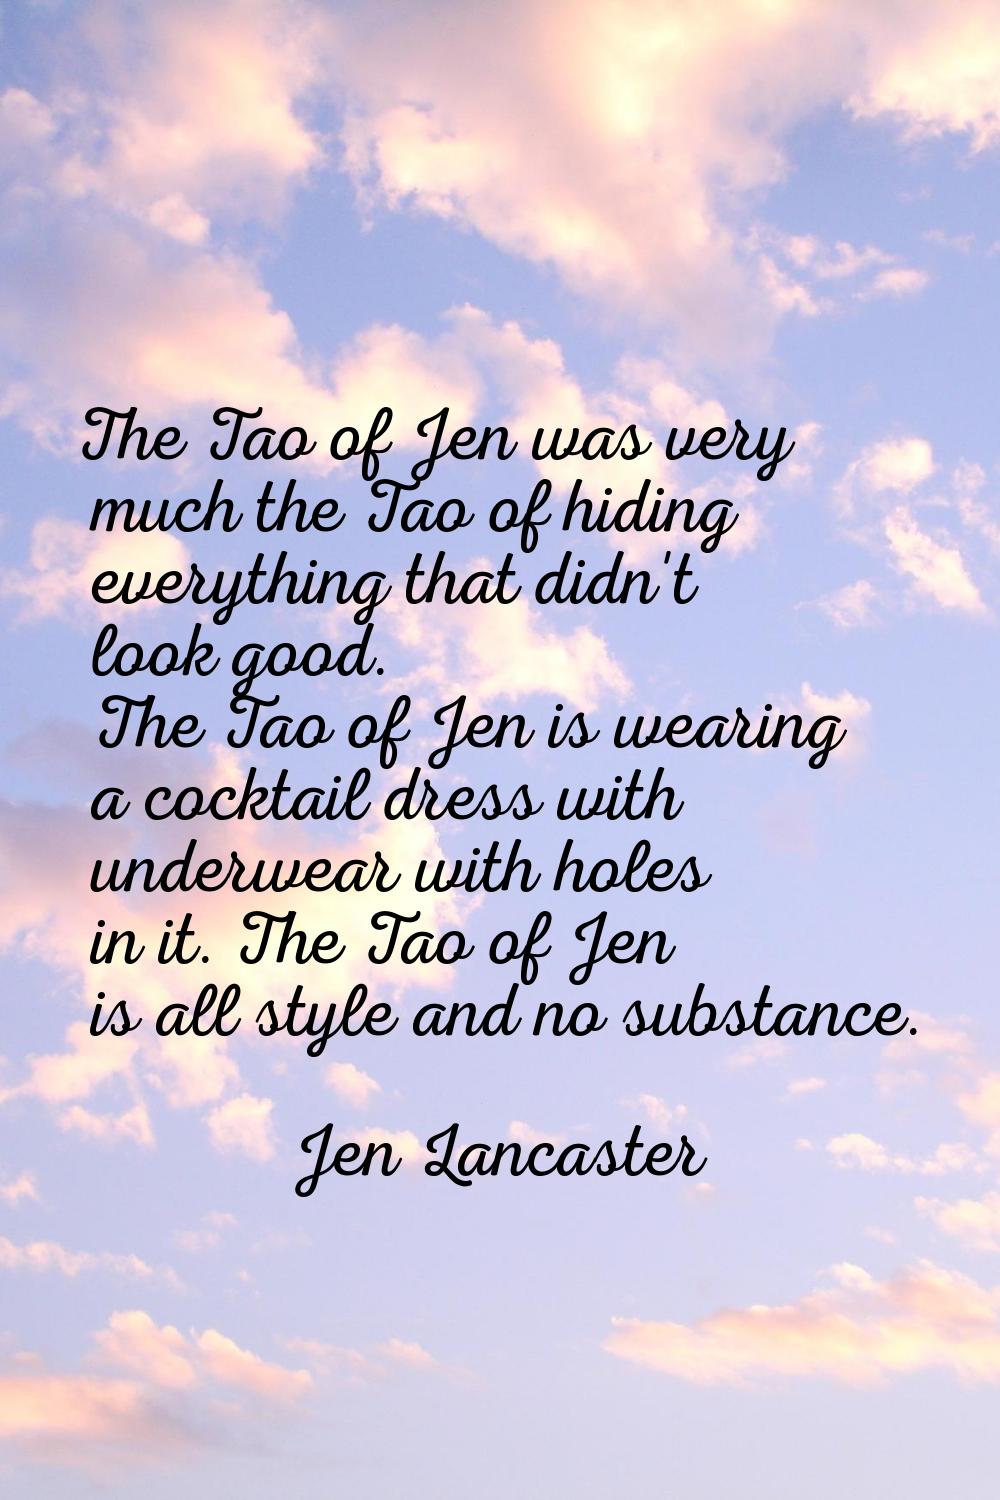 The Tao of Jen was very much the Tao of hiding everything that didn't look good. The Tao of Jen is 